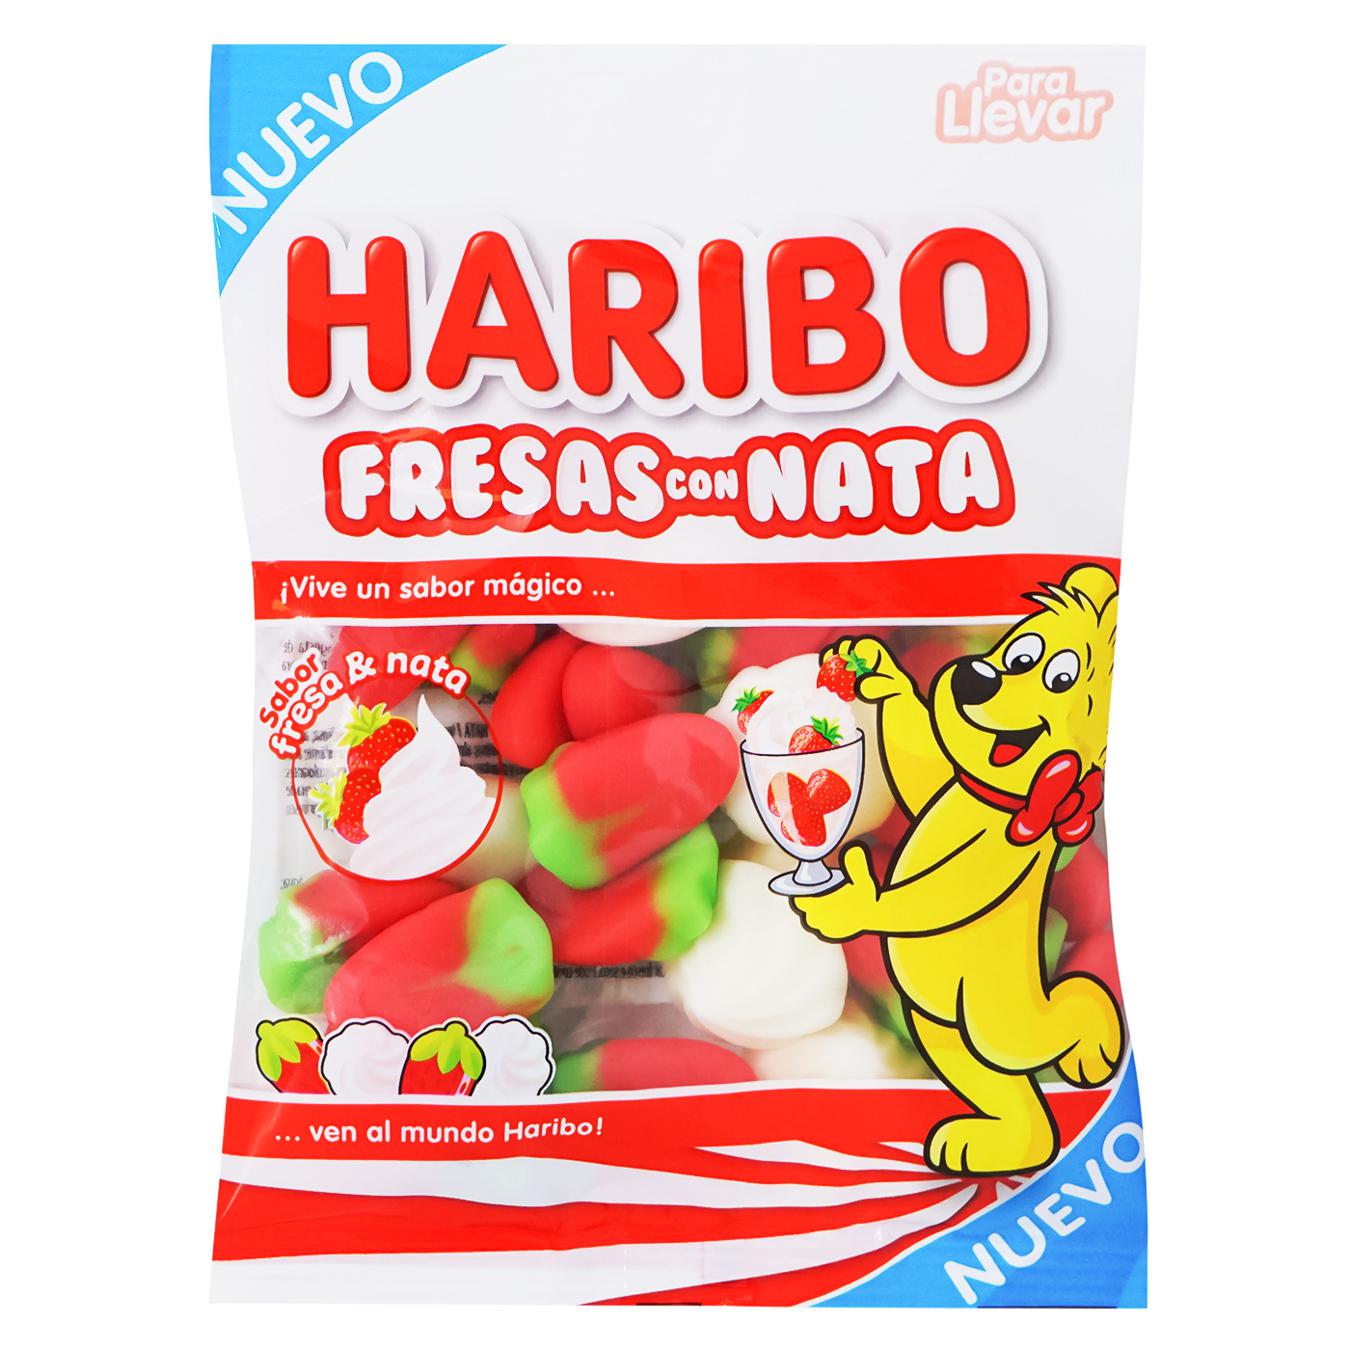 Haribo strawberry and cream chewy candy 100g